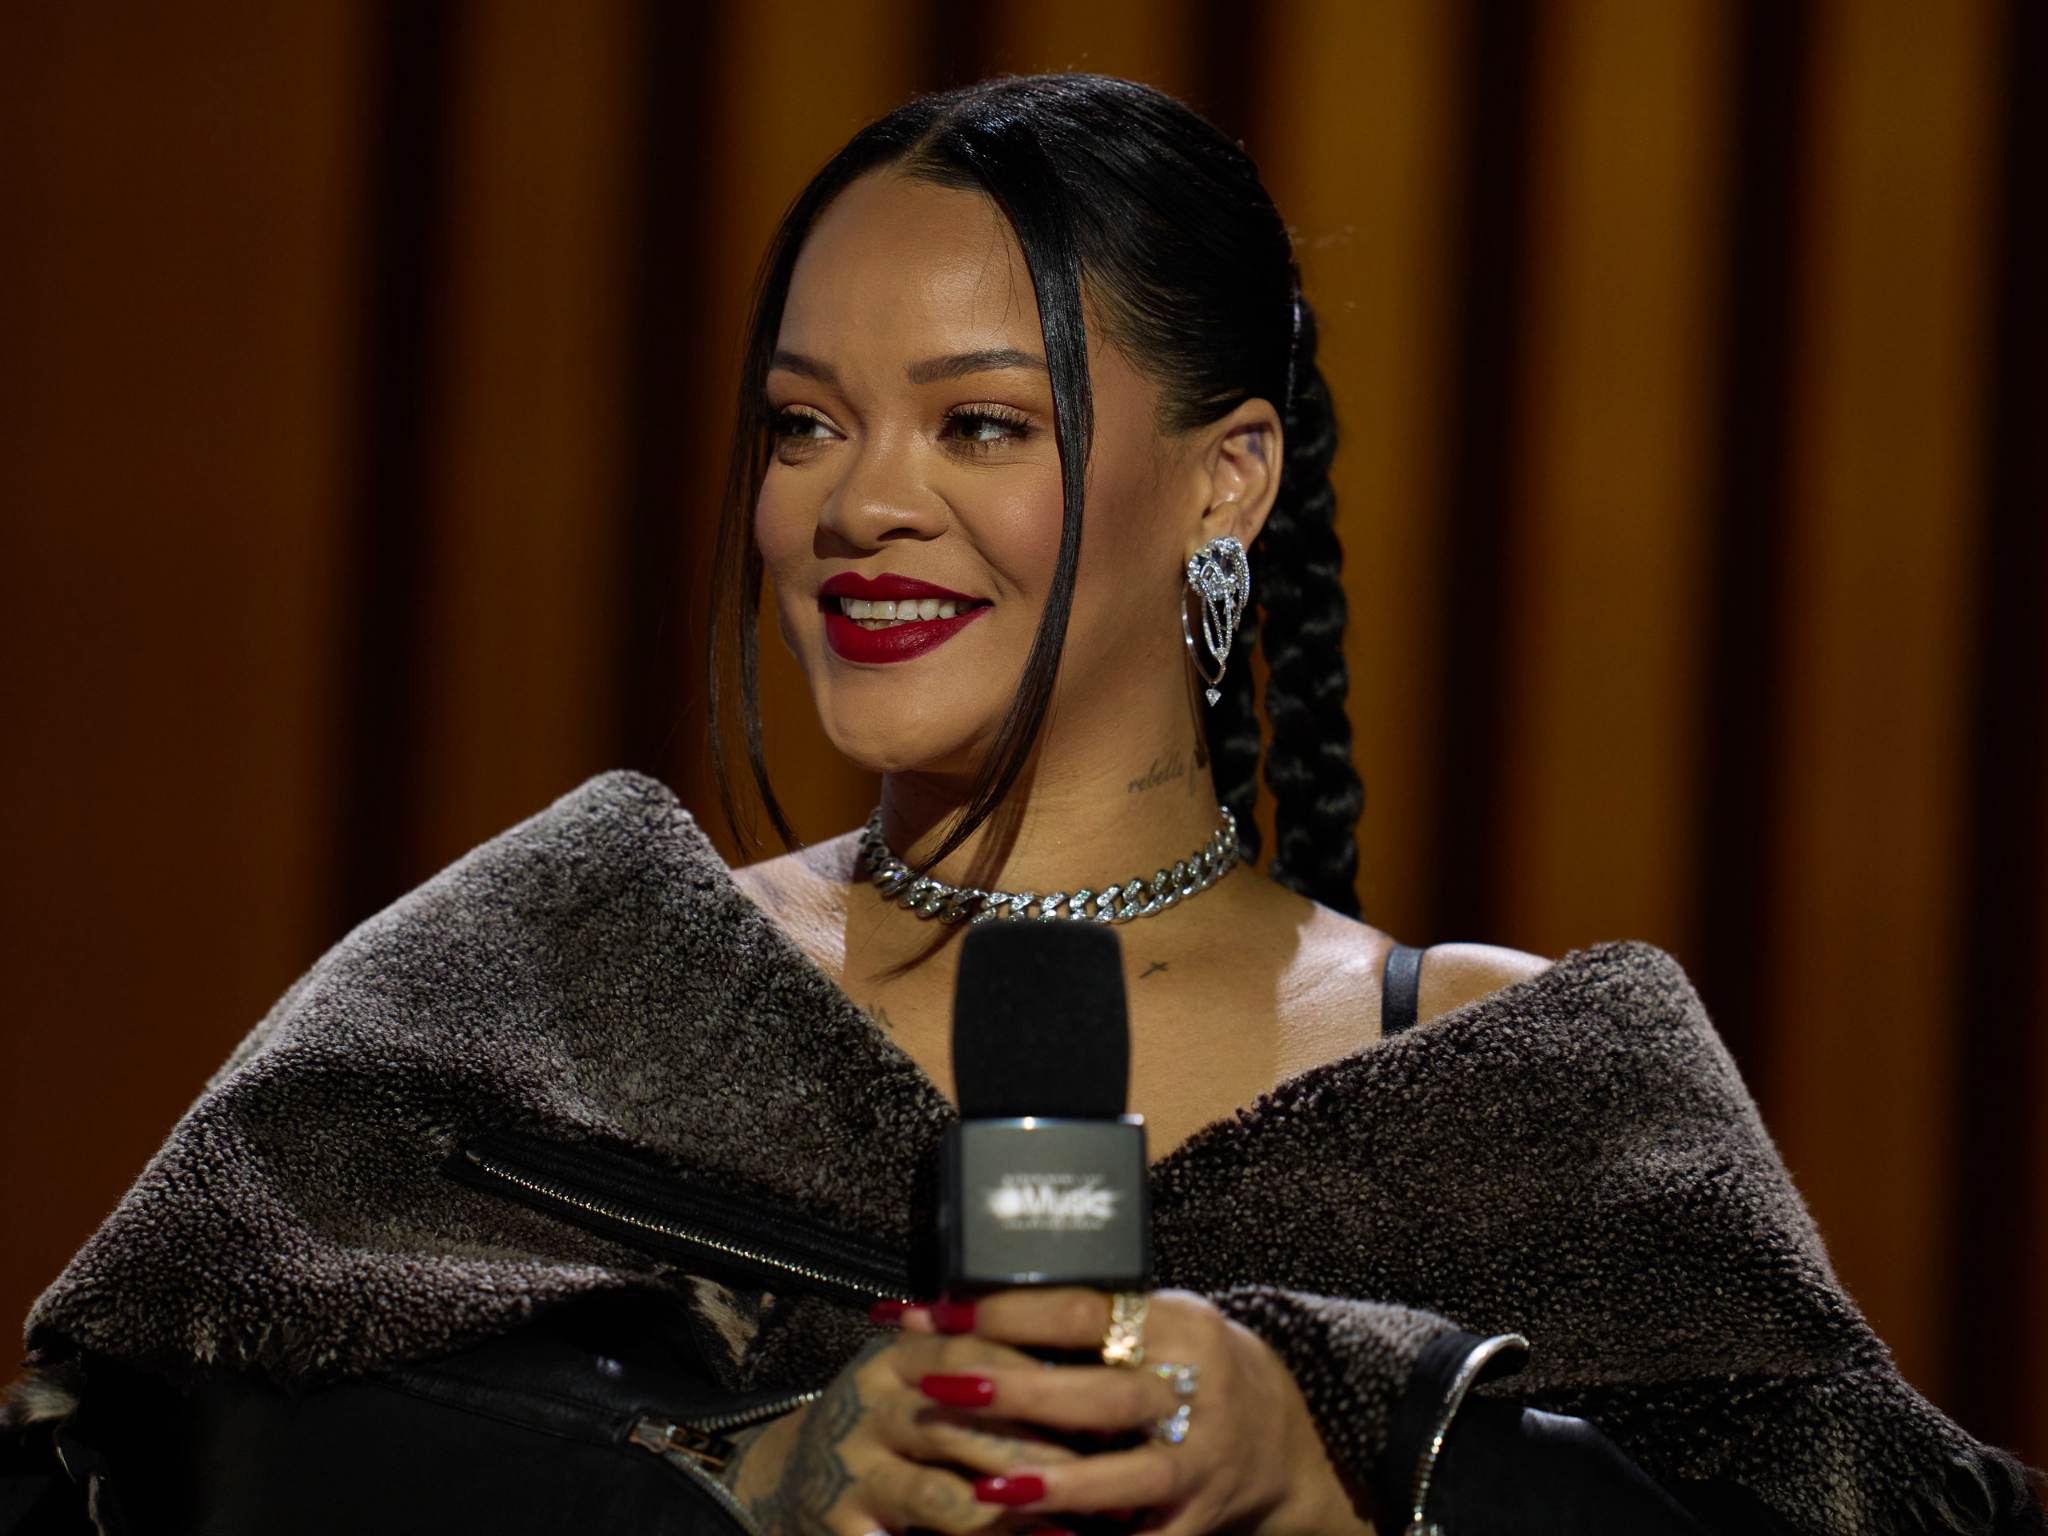 Man arrested for trespassing at Rihanna’s Los Angeles home